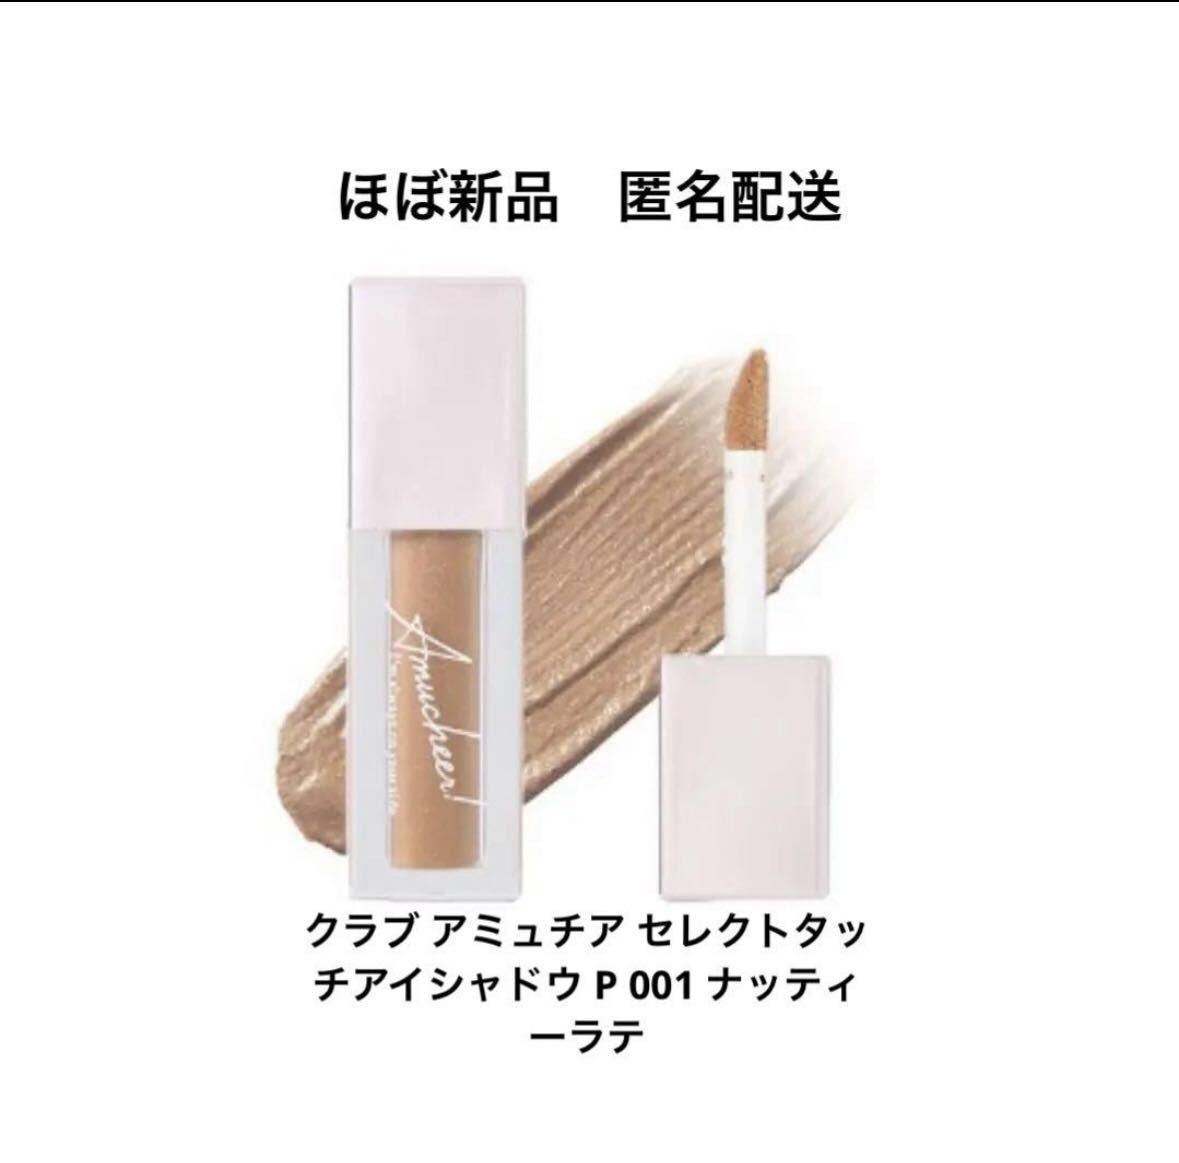  Club amyu Cheer select Touch eyeshadow P 001na tea Latte [ postage included * prompt decision price ]